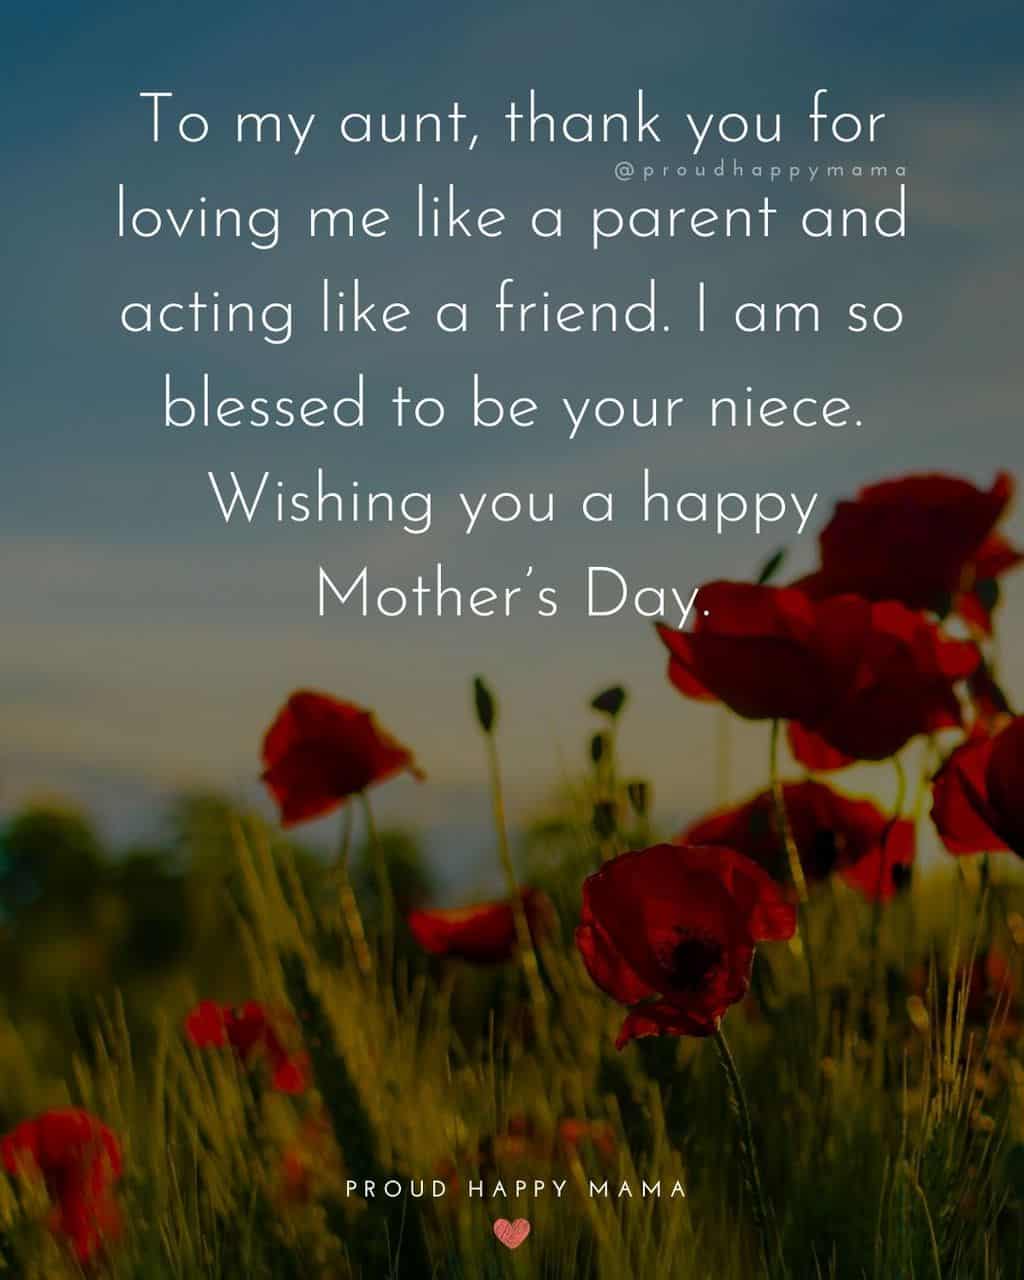 Happy Mothers Day Aunt - To my aunt, thank you for loving me like a parent and acting like a friend. I am so blessed to be your niece. Wishing you a happy Mothers Day.